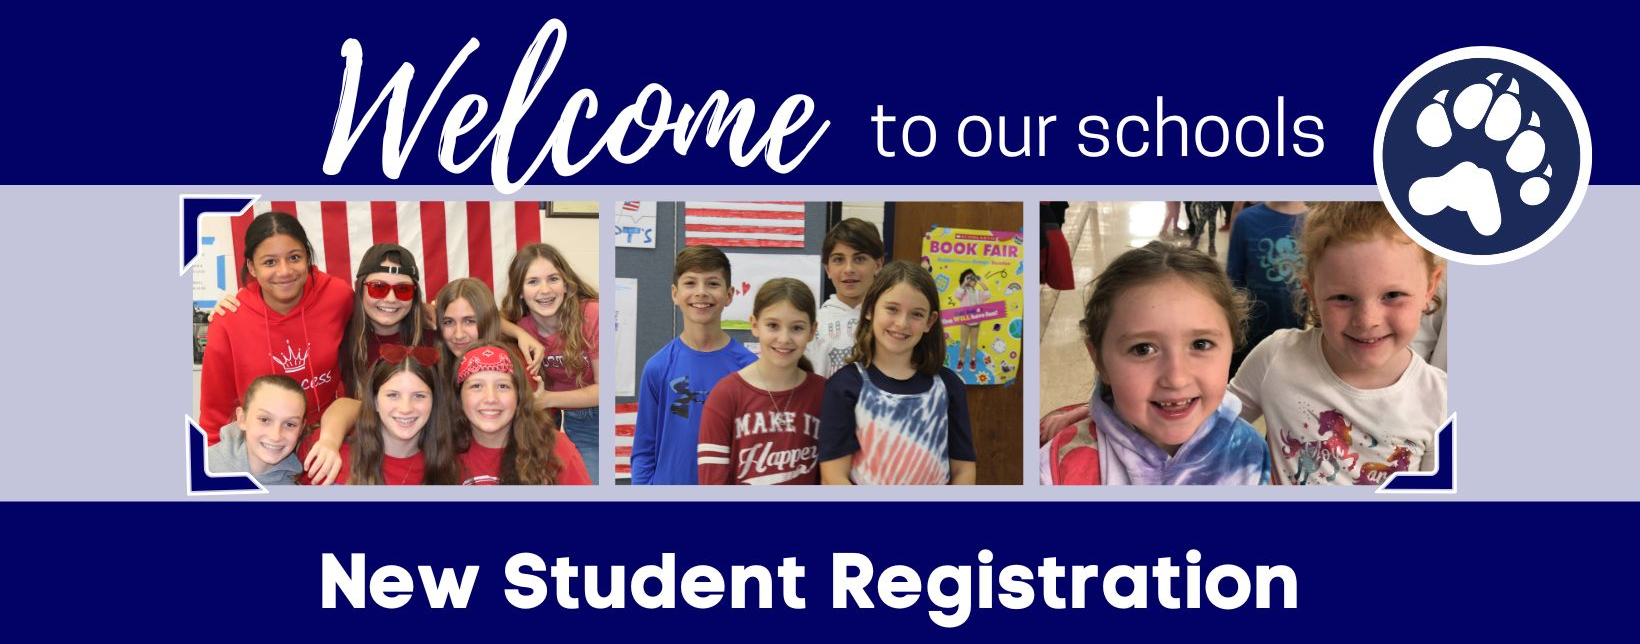 Welcome to Our Schools. New Student Registration.